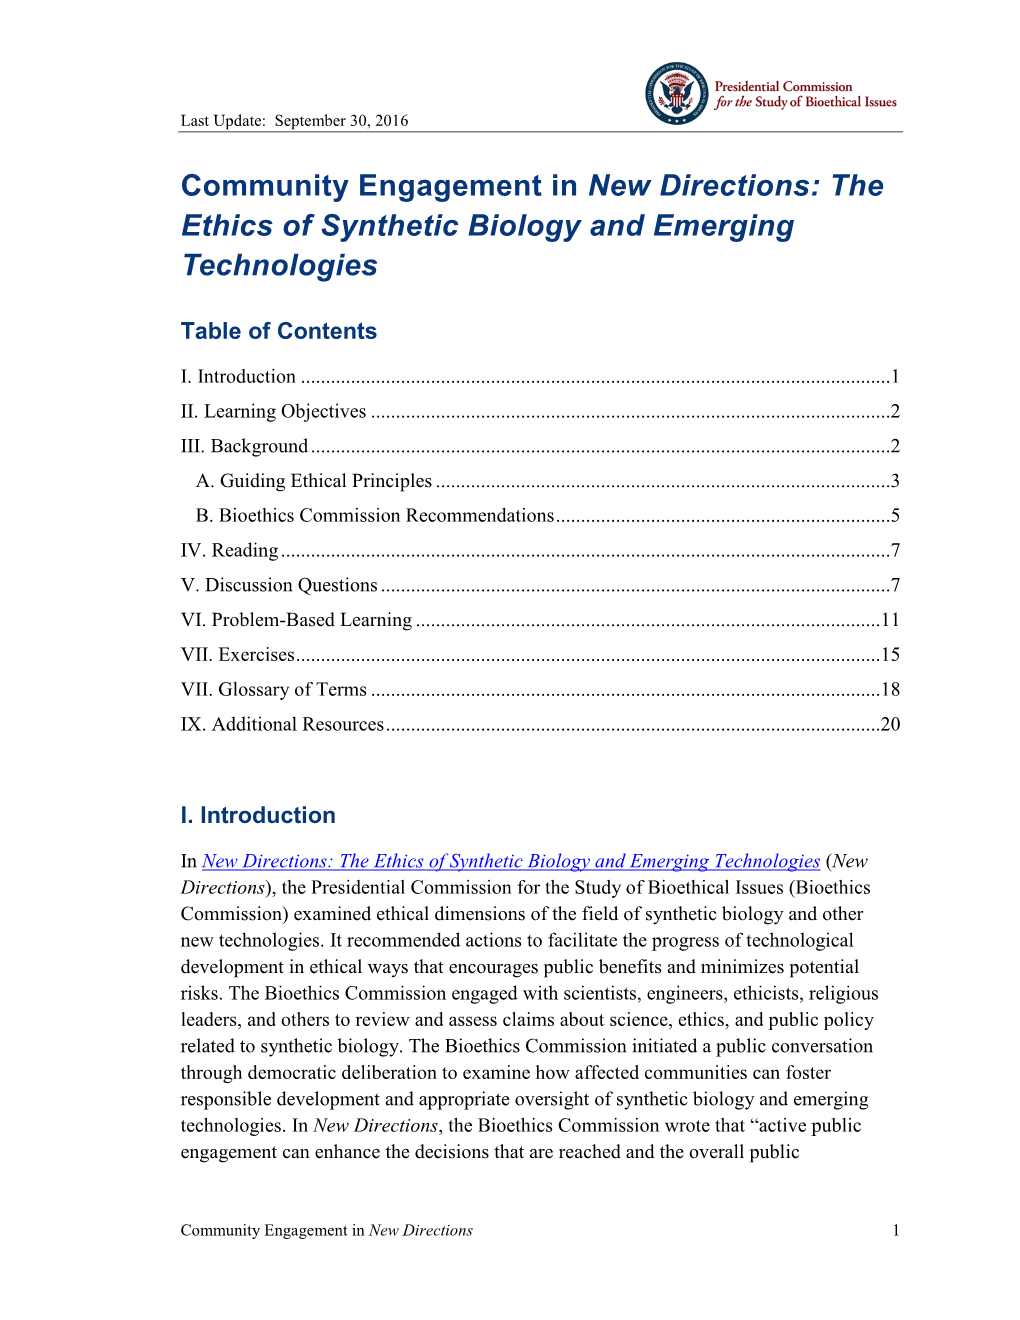 Community Engagement in New Directions: the Ethics of Synthetic Biology and Emerging Technologies